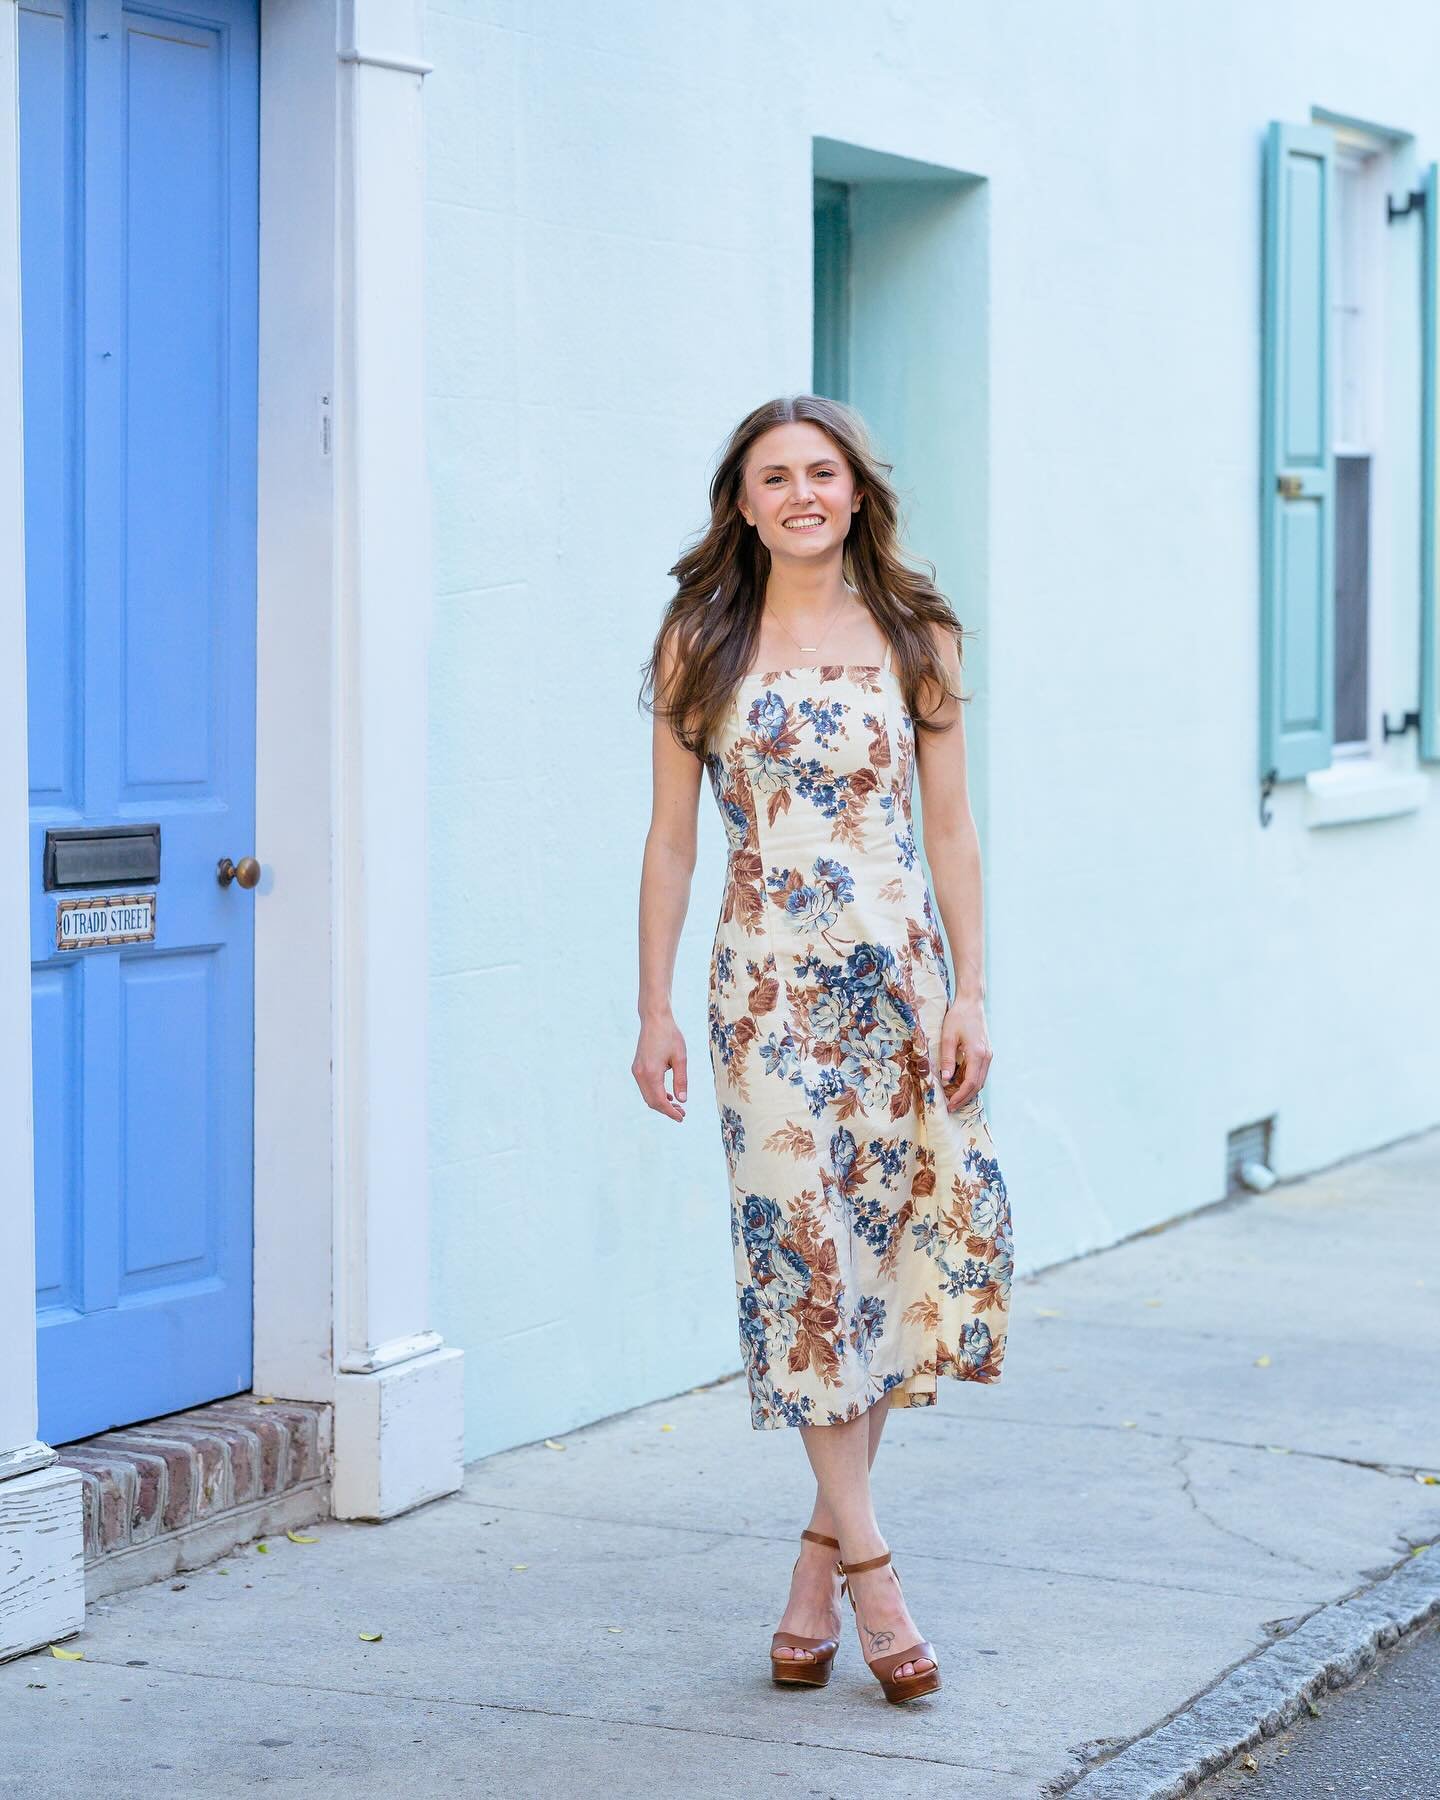 Congratulations to this incredible soon-to-be MUSC med school grad! As you set your sights on UVA this fall, we captured some magical moments from Tradd Street to the Battery. 
Here&rsquo;s to celebrating your journey and the amazing MD you&rsquo;re 